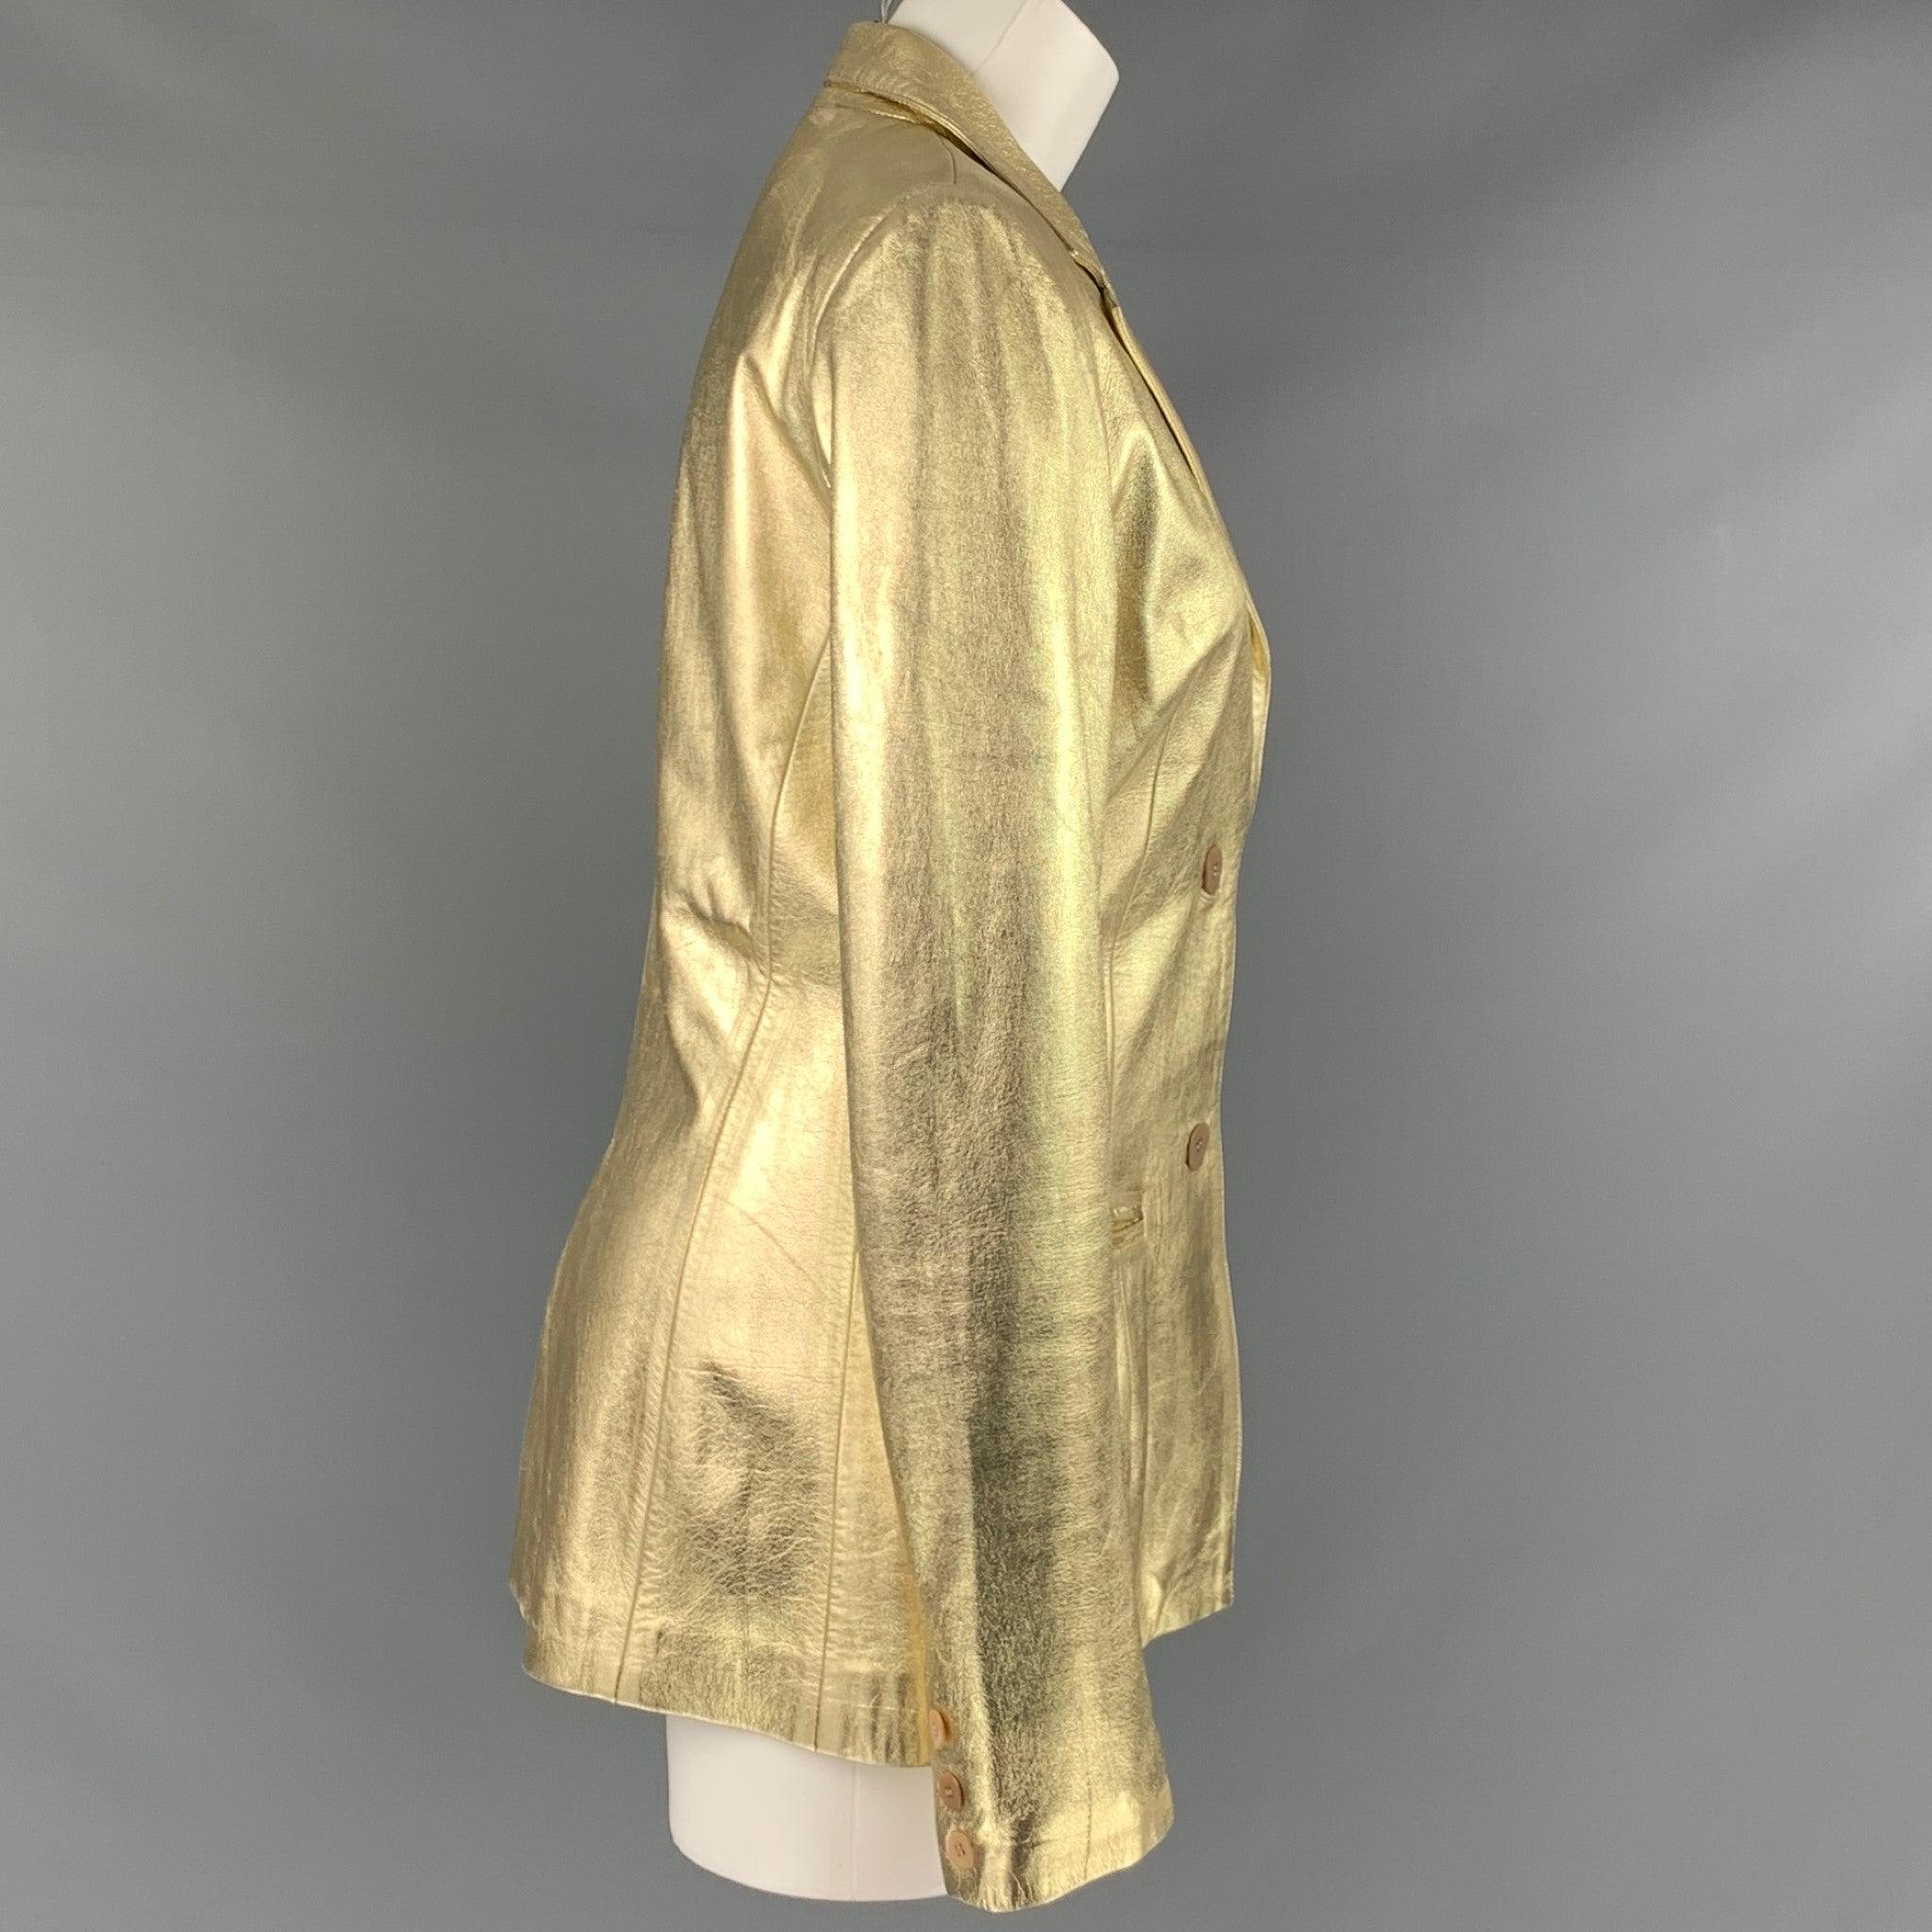 BLUMARINE jacket in a metallic gold lambskin leather fabric featuring notch lapel, two pockets, and a two button closure. Made in Italy.Very Good Pre-Owned Condition. Moderate signs of wear. 

Marked:   IT 44 

Measurements: 
 
Shoulder: 16 inches